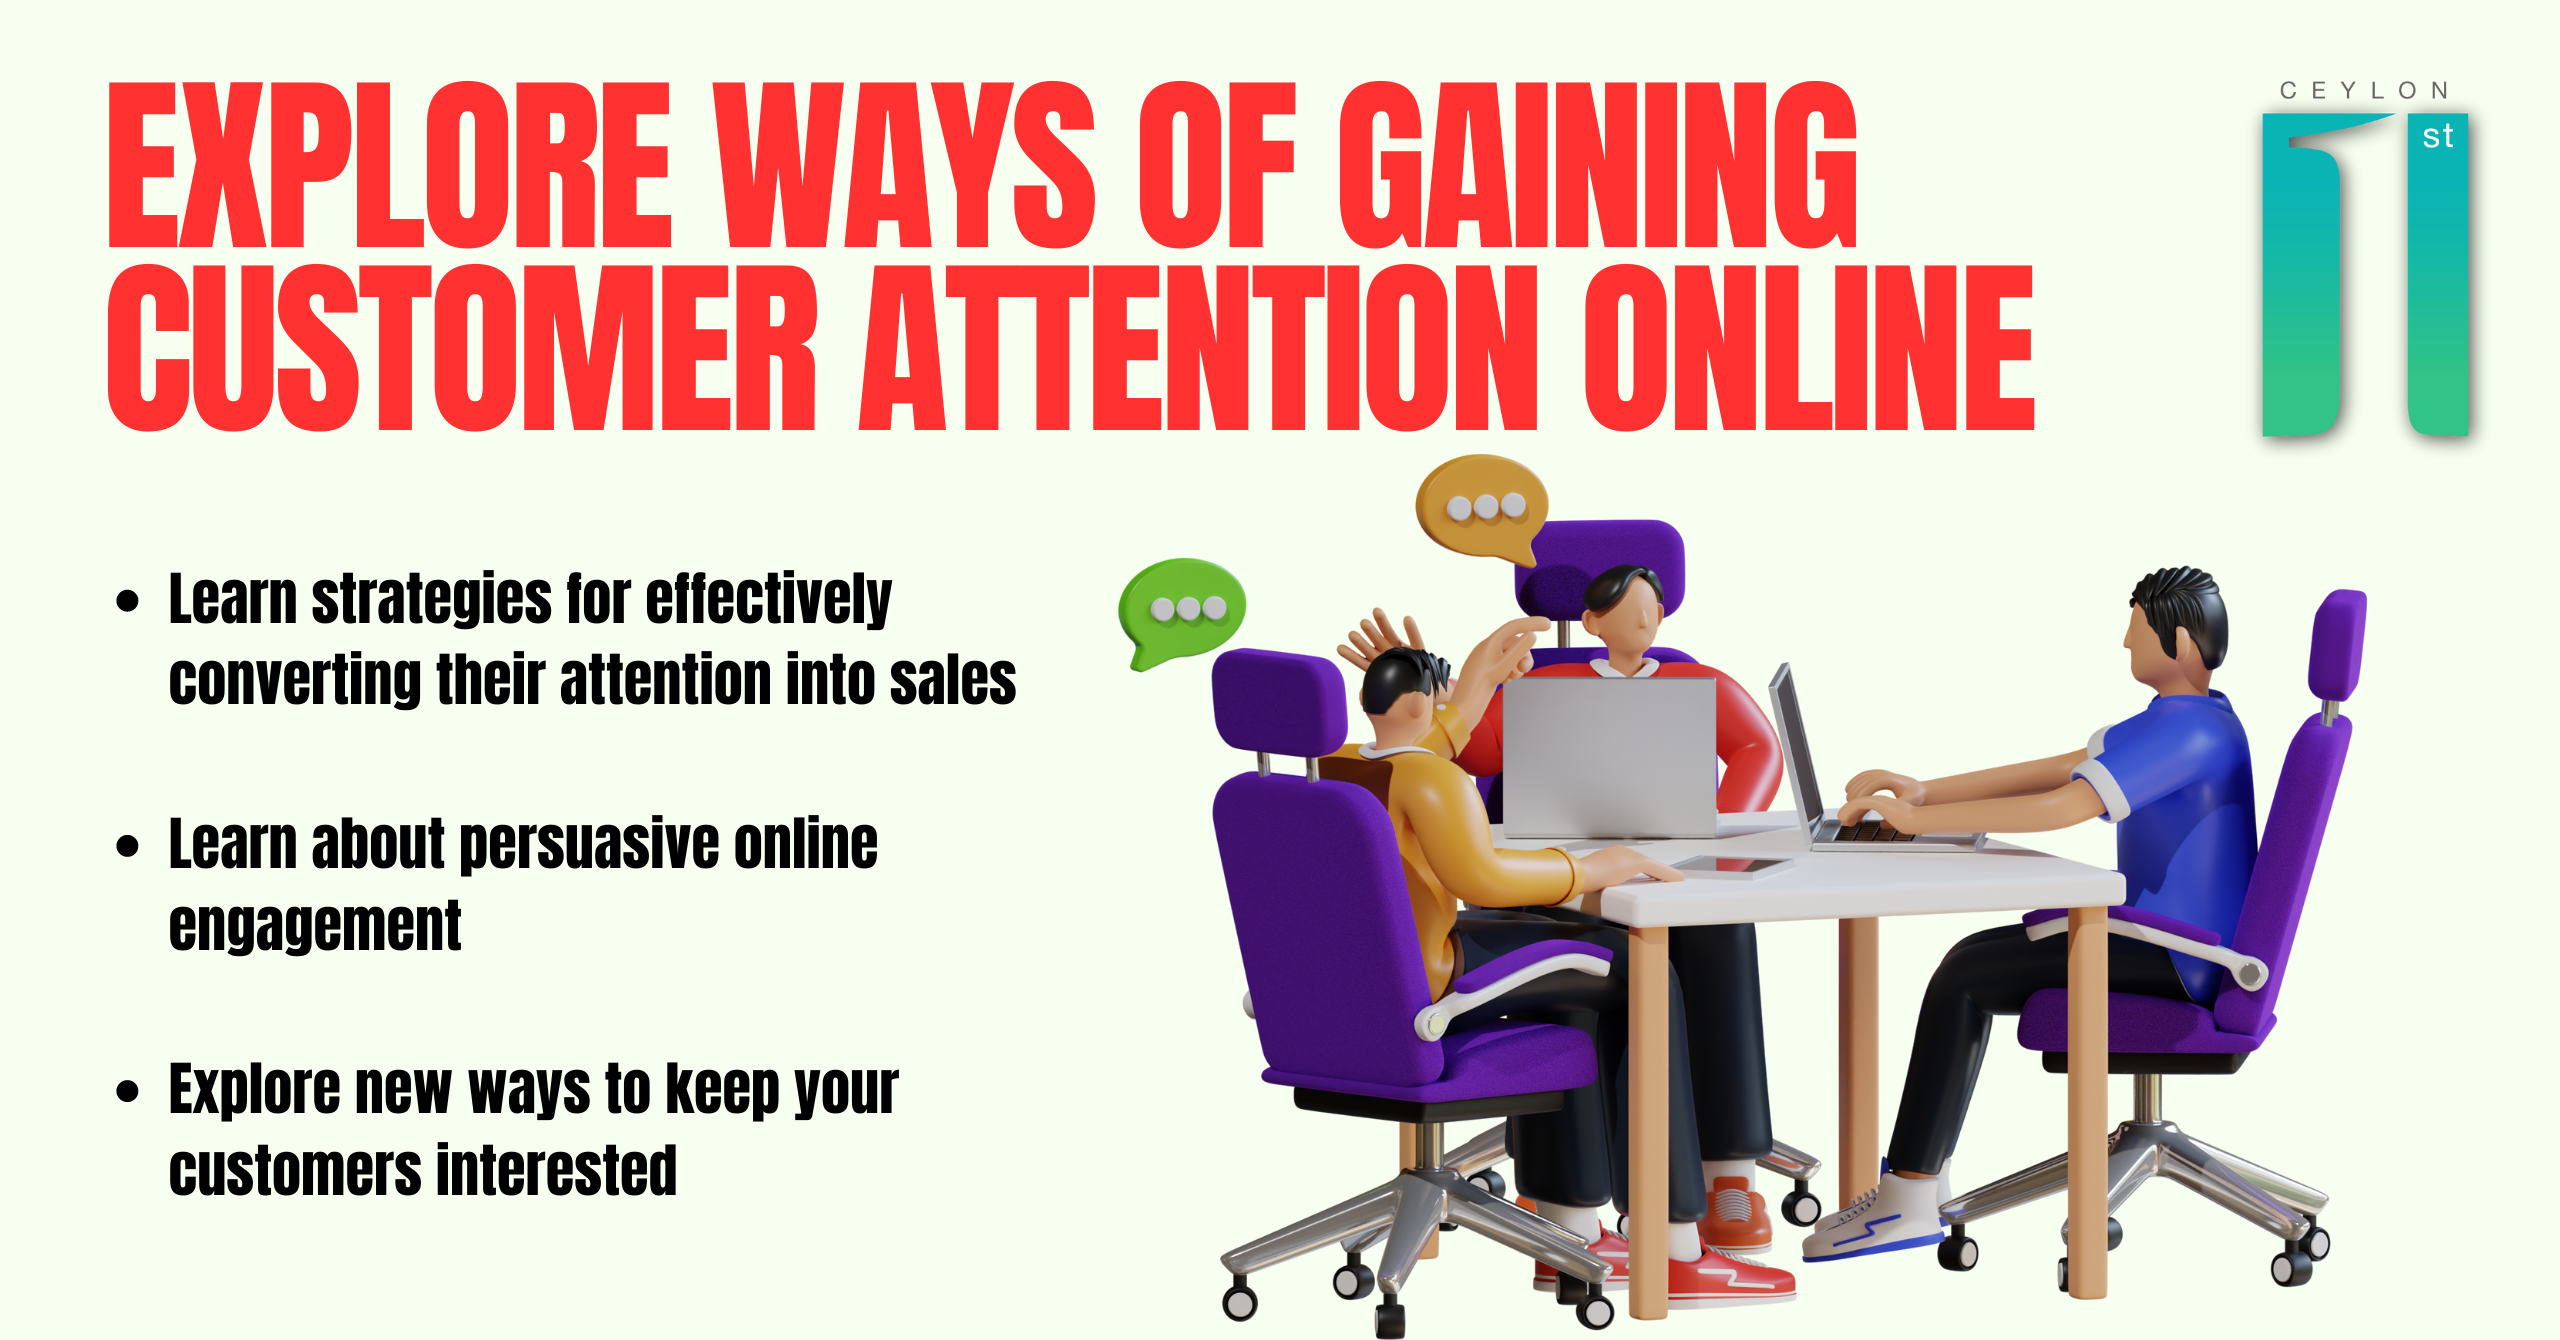 Explore ways of gaining customer attention online